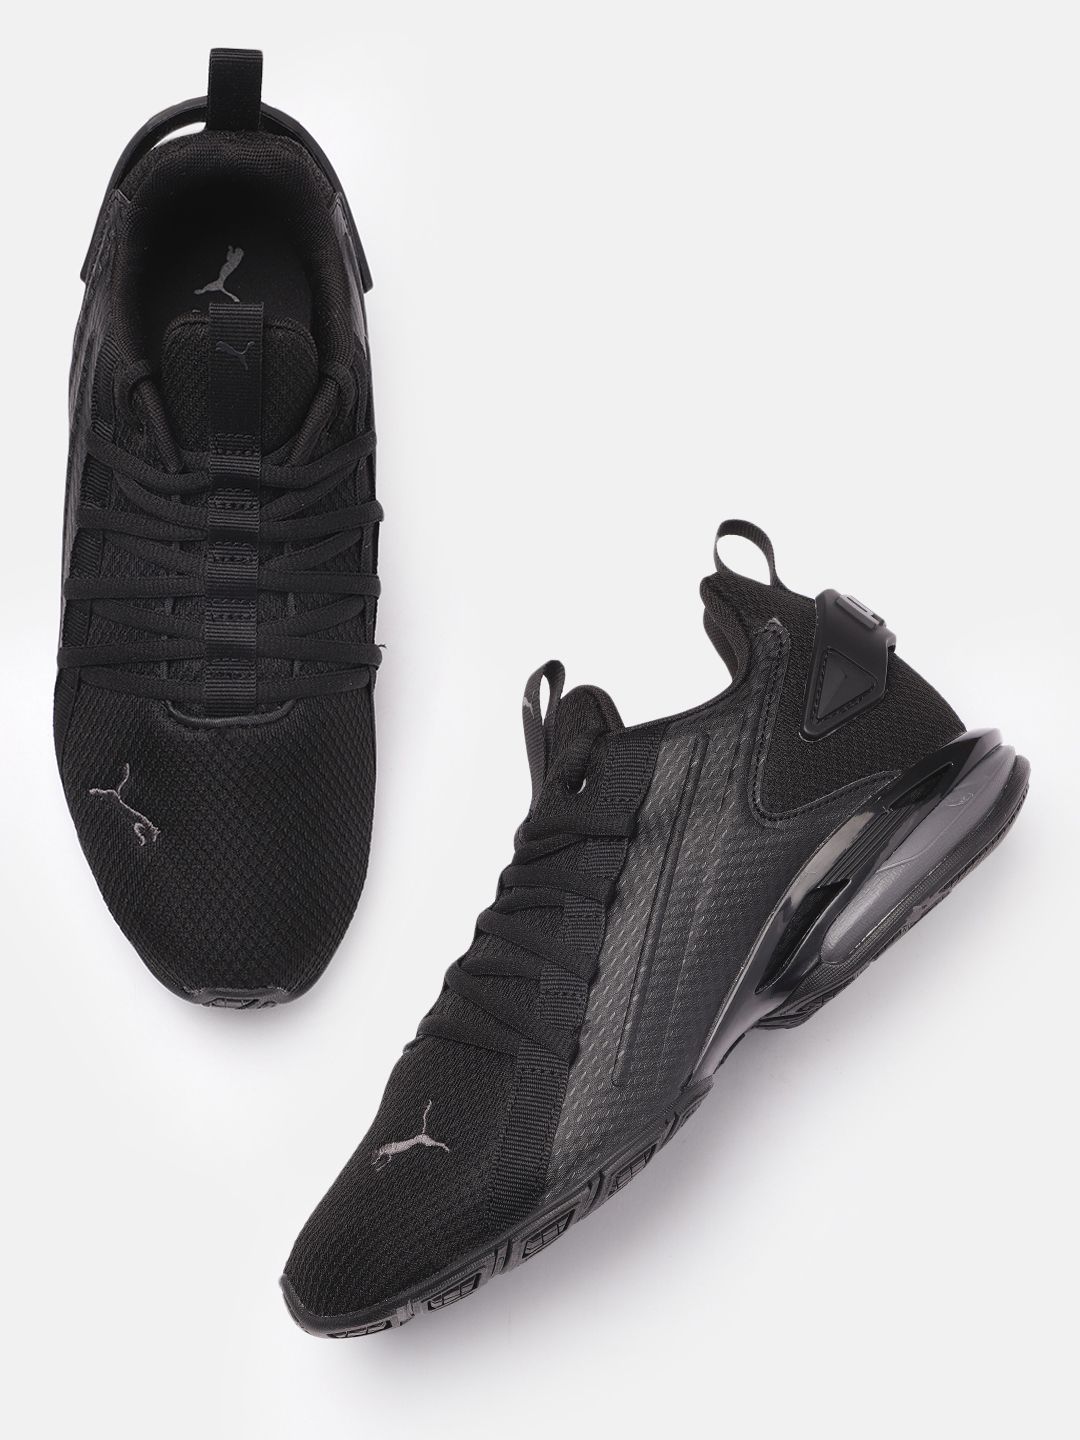 Puma Unisex Black Ion SOFTFOAM Running Shoes Price in India